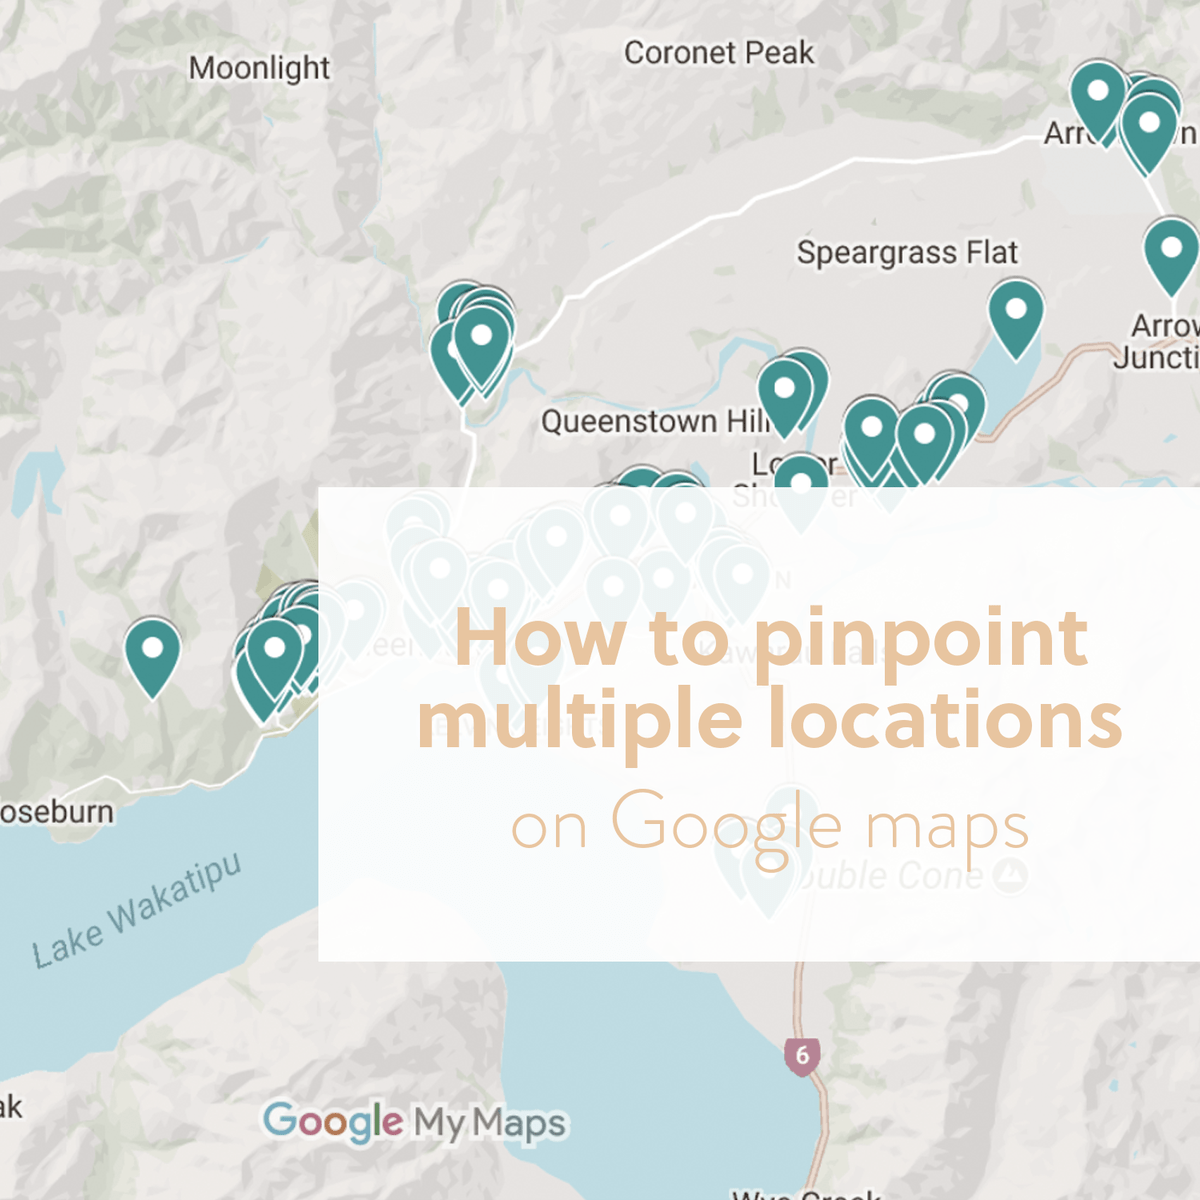 Can you map multiple locations on Google Maps?